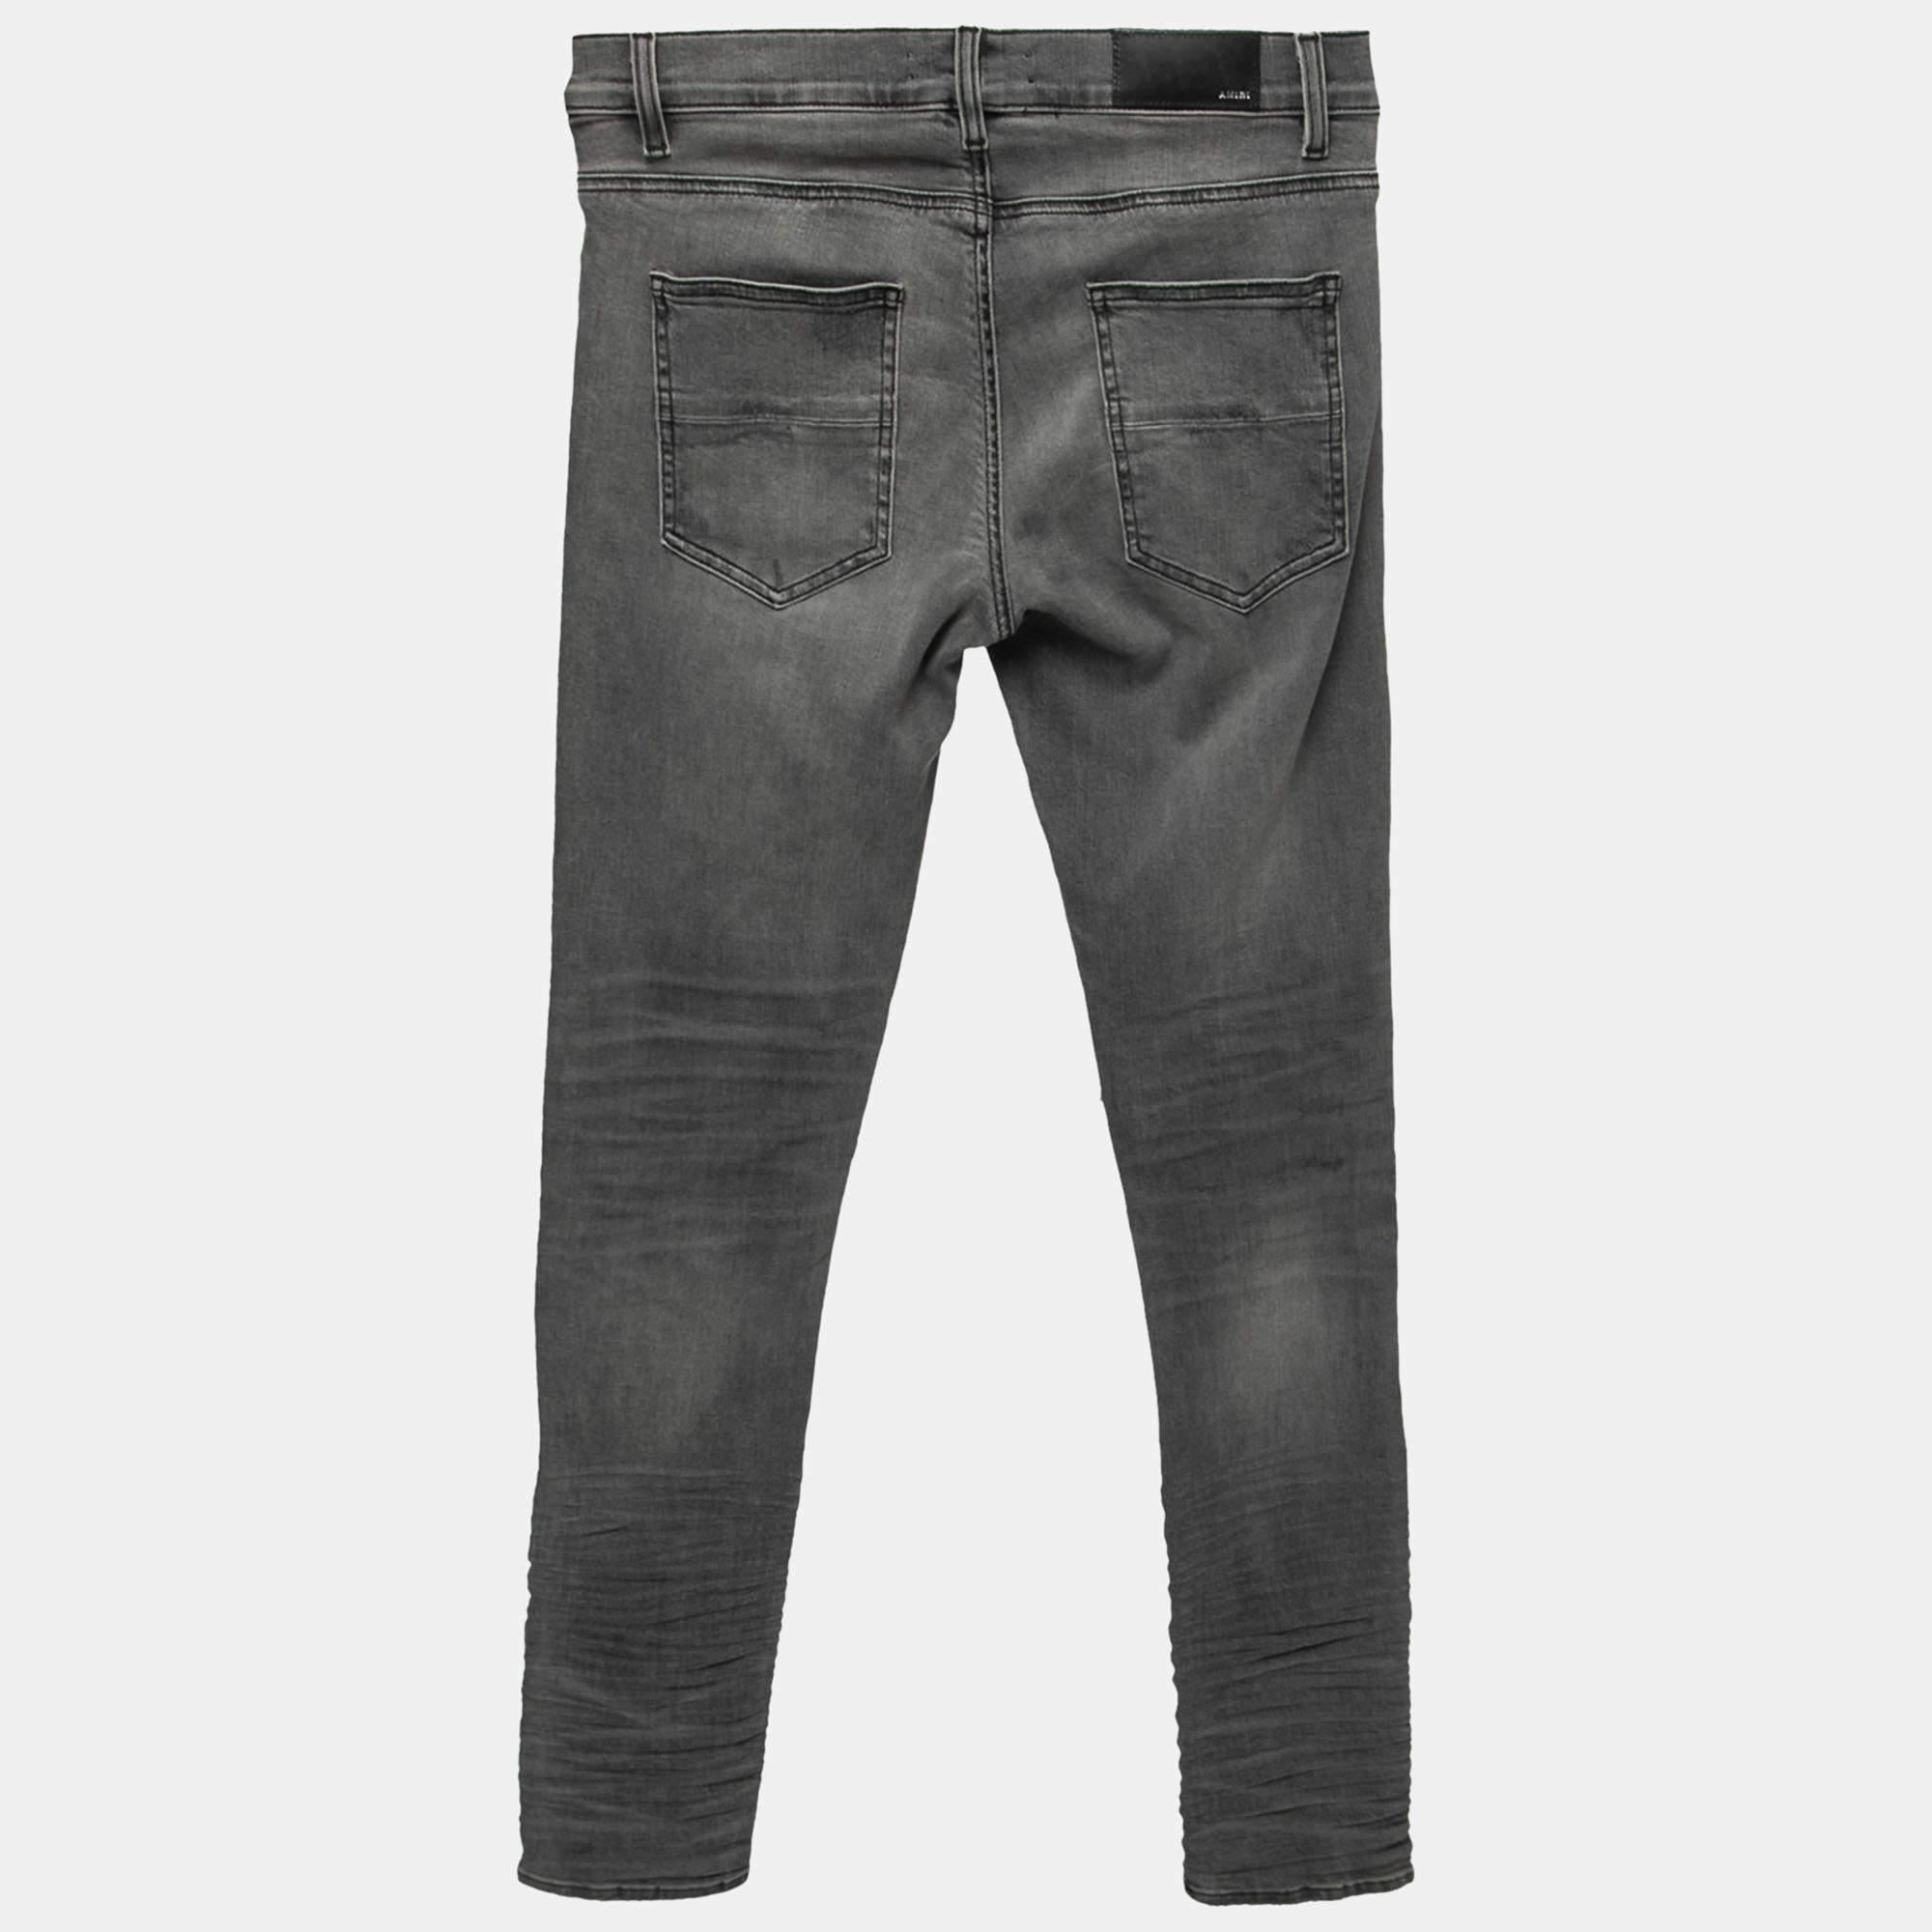 A must-have for your casual wardrobe, these Amiri jeans are made of denim offering a comfortable wearing experience. They carry a grey hue with a distressed finish. These well-fitting jeans have multiple pockets and a buttoned closure.

